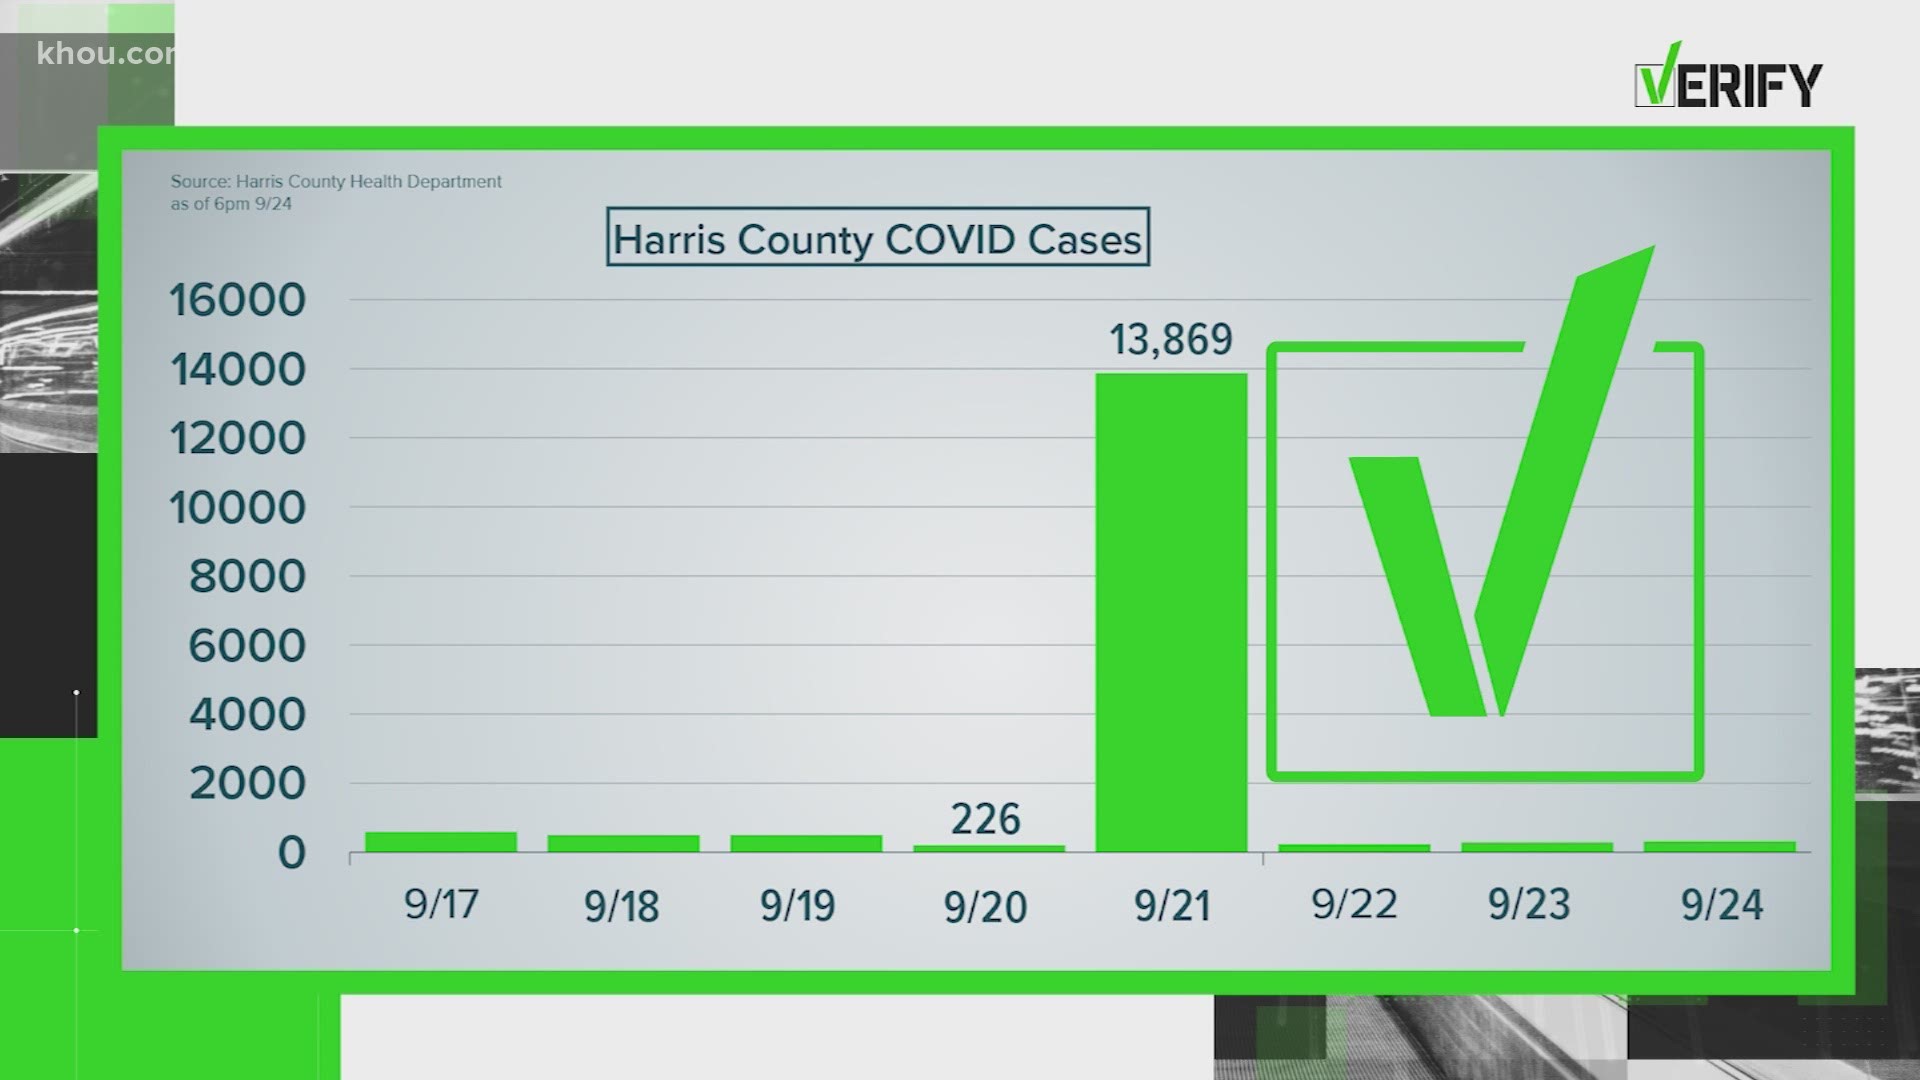 The Harris County COVID-19 case curve showed a sharp spike on Sept. 19, when nearly 14,000 new cases were added. We verified what caused the spike.